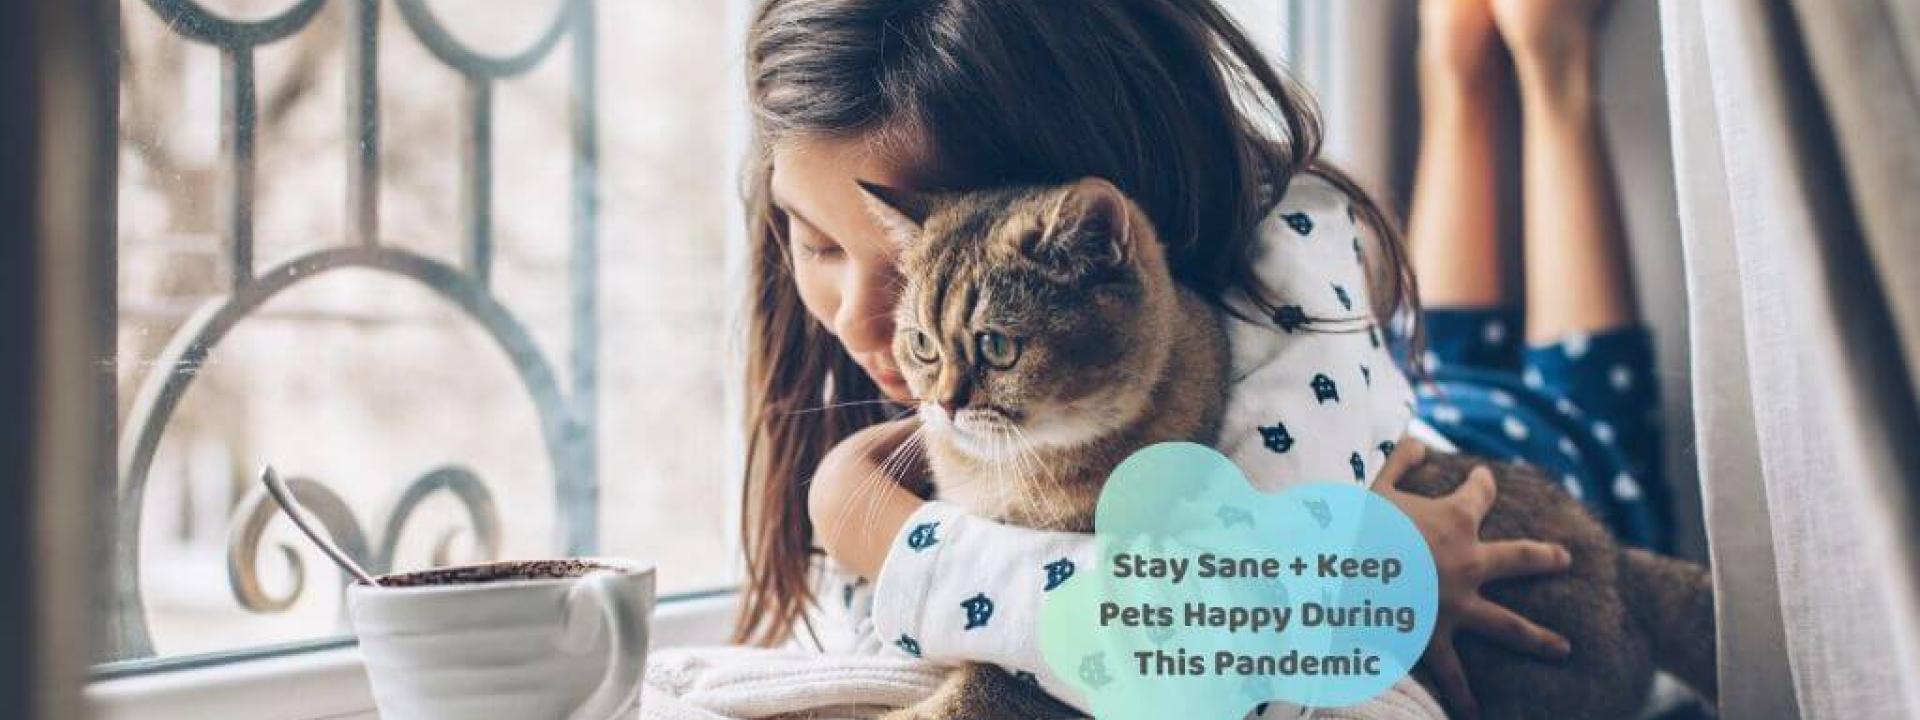 keep pets happy during pandemic